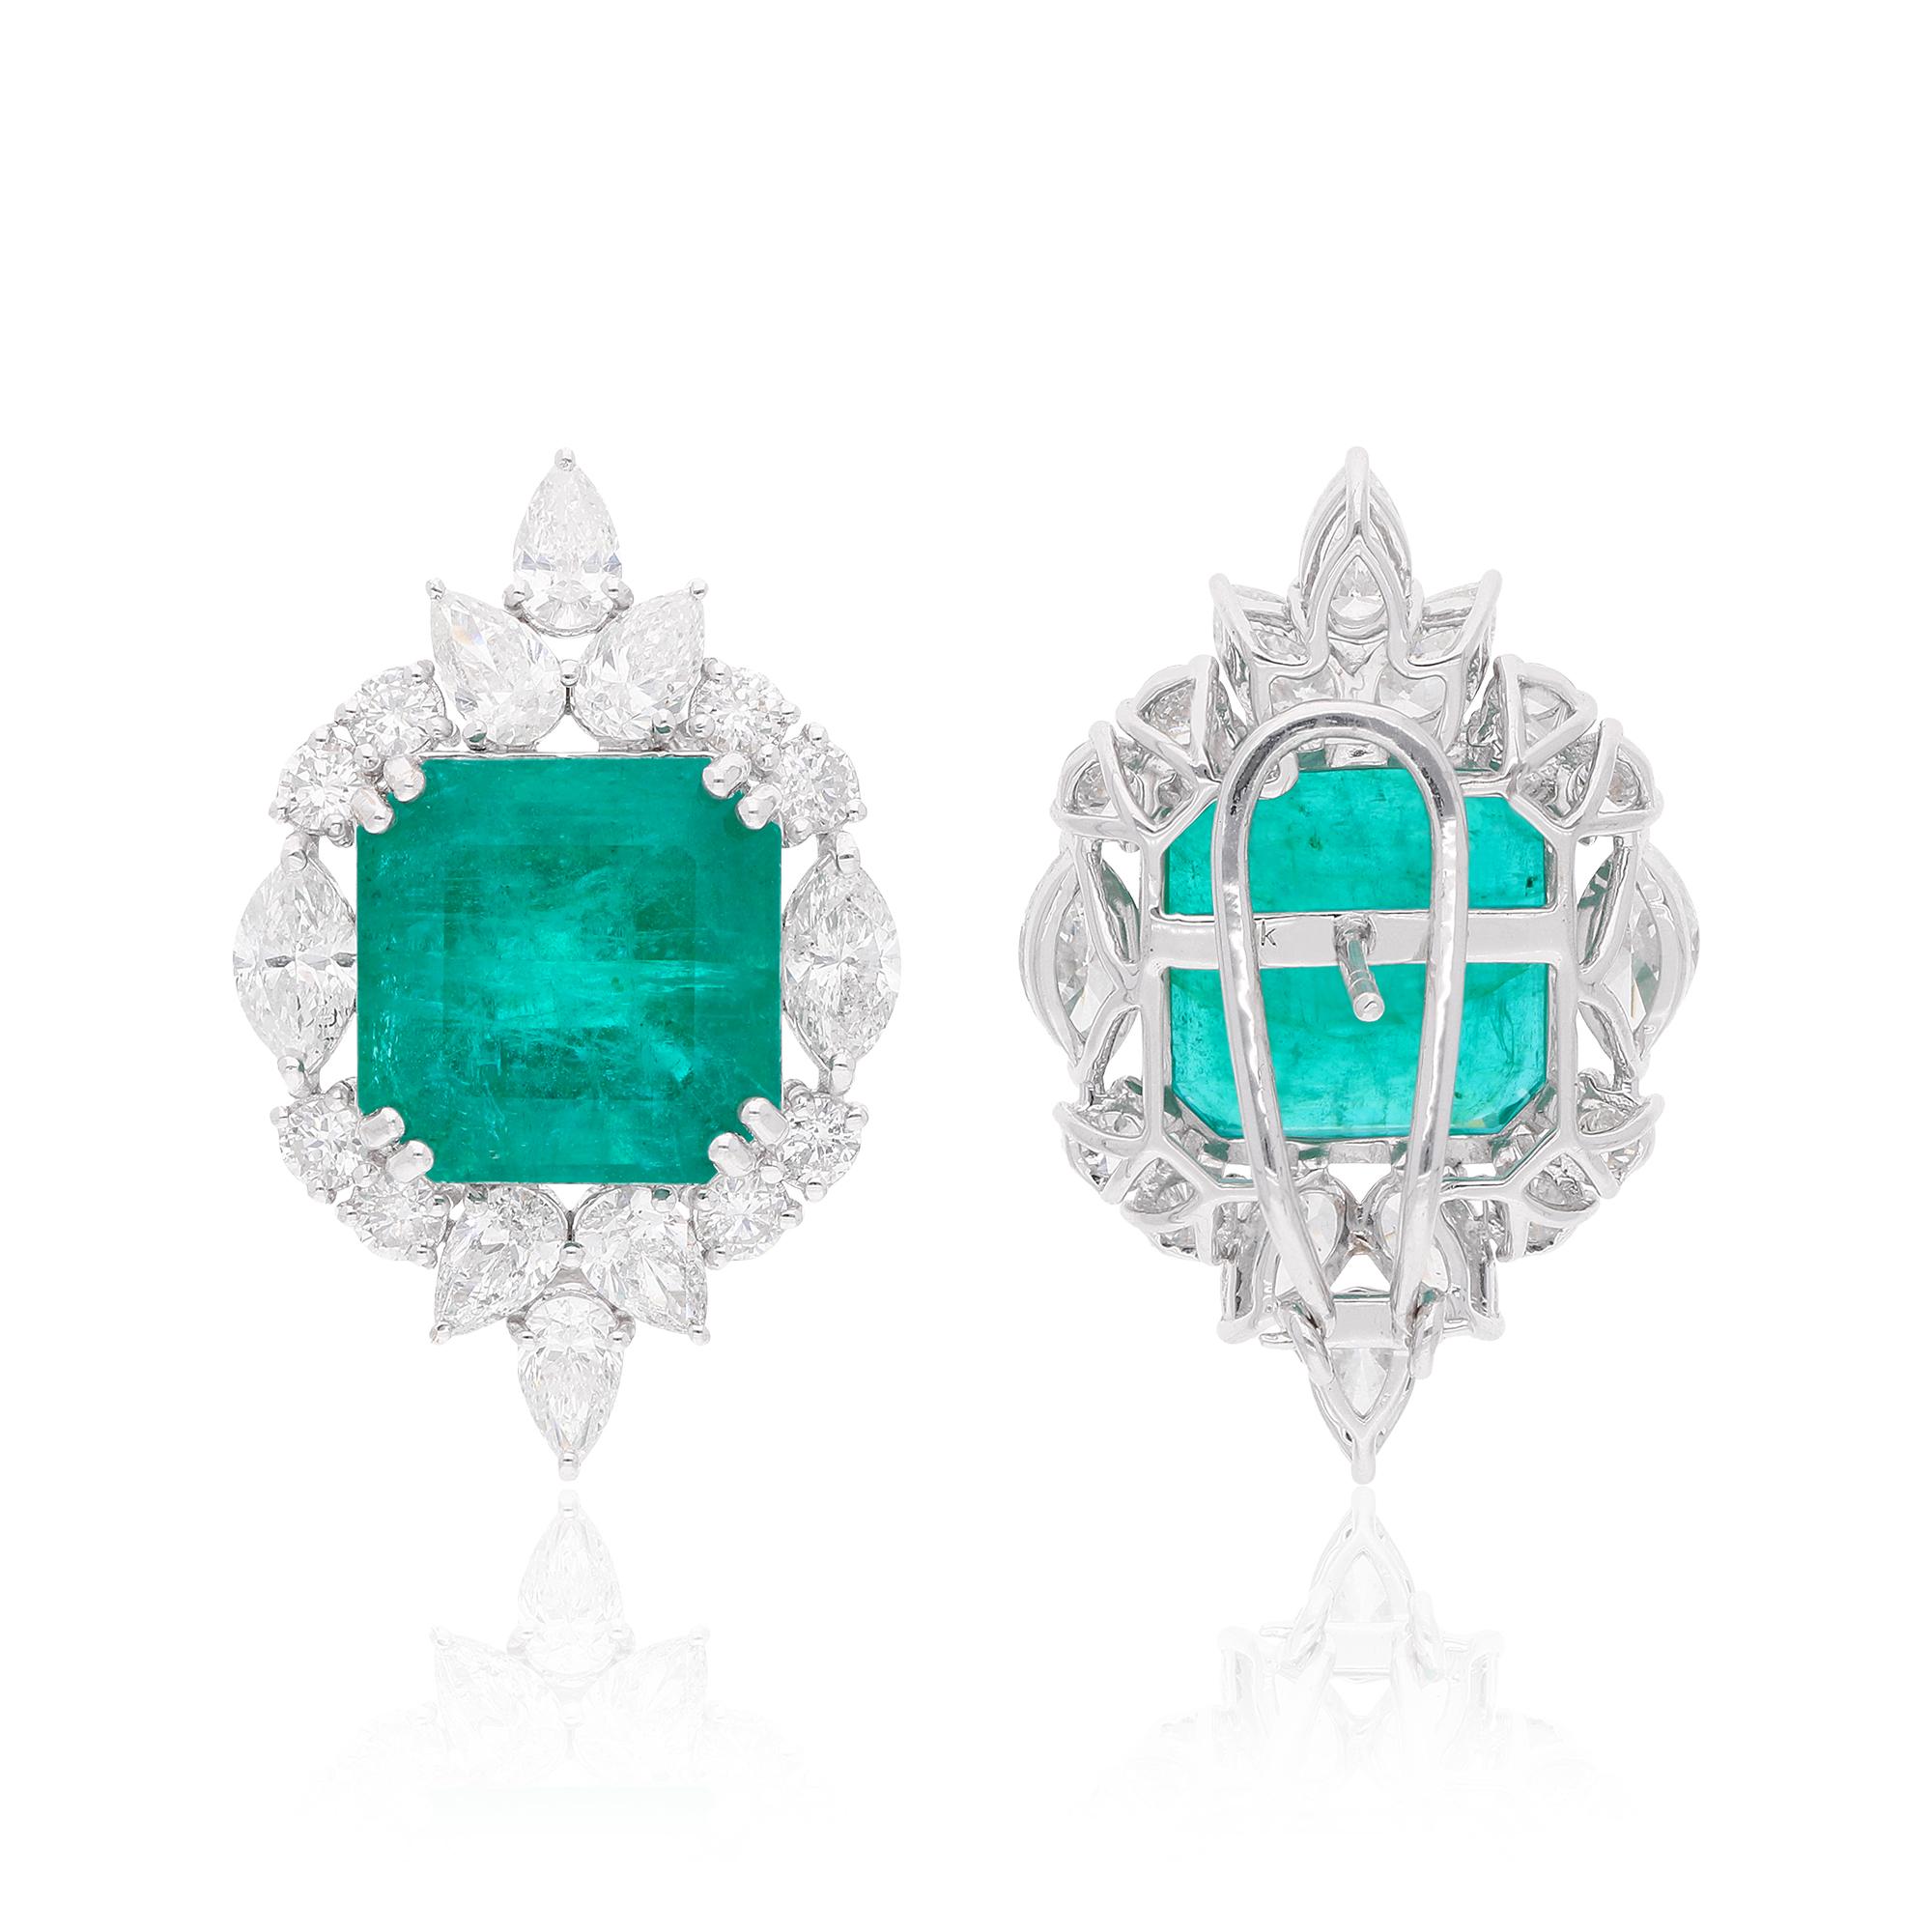 Item Code :- SEE-12853
Gross Wt. :- 16.15 gm
18k White Gold Wt. :- 10.46 gm
Diamond Wt. :- 6.17 Ct. ( AVERAGE DIAMOND CLARITY SI1-SI2 & COLOR H-I )
Emerald Wt. :- 22.26 Ct.
Earrings Size :- 32 mm approx.

✦ Sizing
.....................
We can adjust